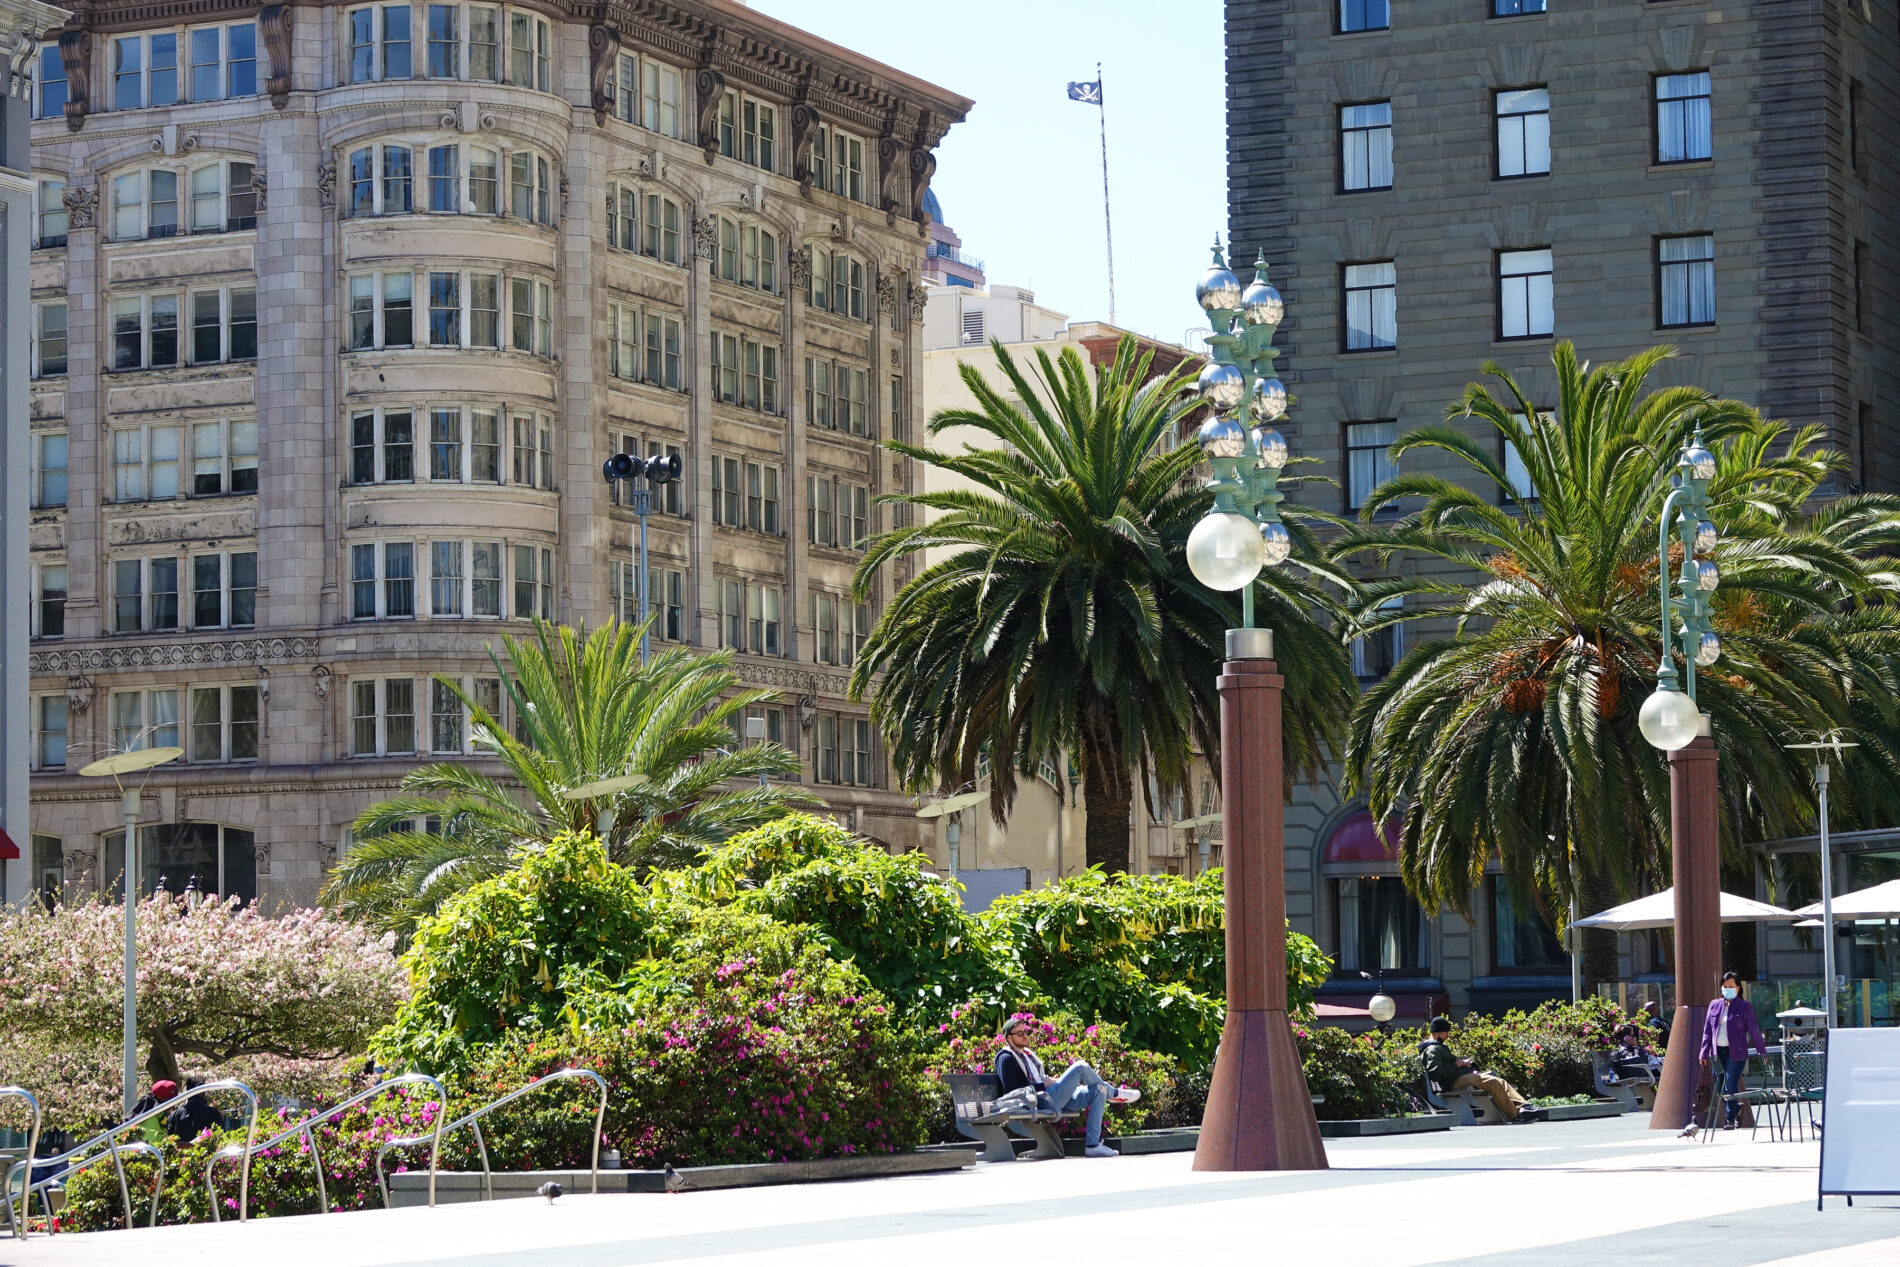 Union Square in San Francisco’s upscale shopping district.